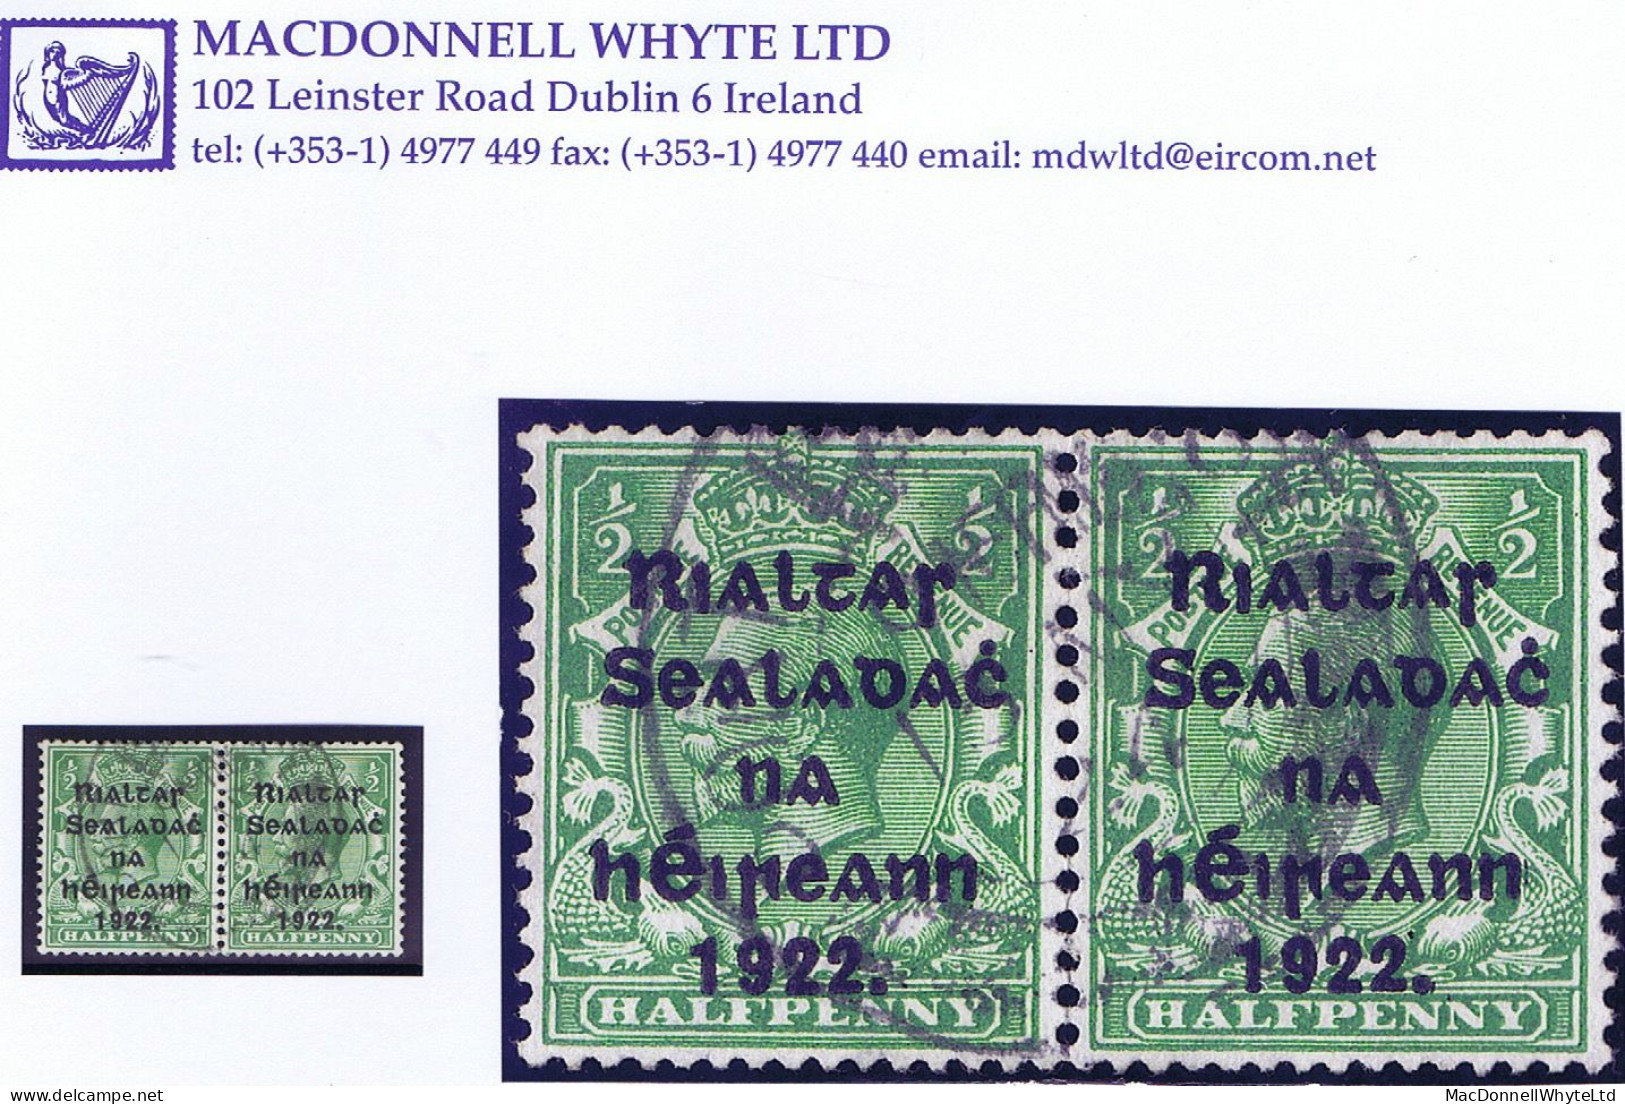 Ireland 1922 Harrison Rialtas 5-line Coils ½d Green Horizontal Pair Fine Used 1924 PORT LAOIGHISE Cds - Used Stamps